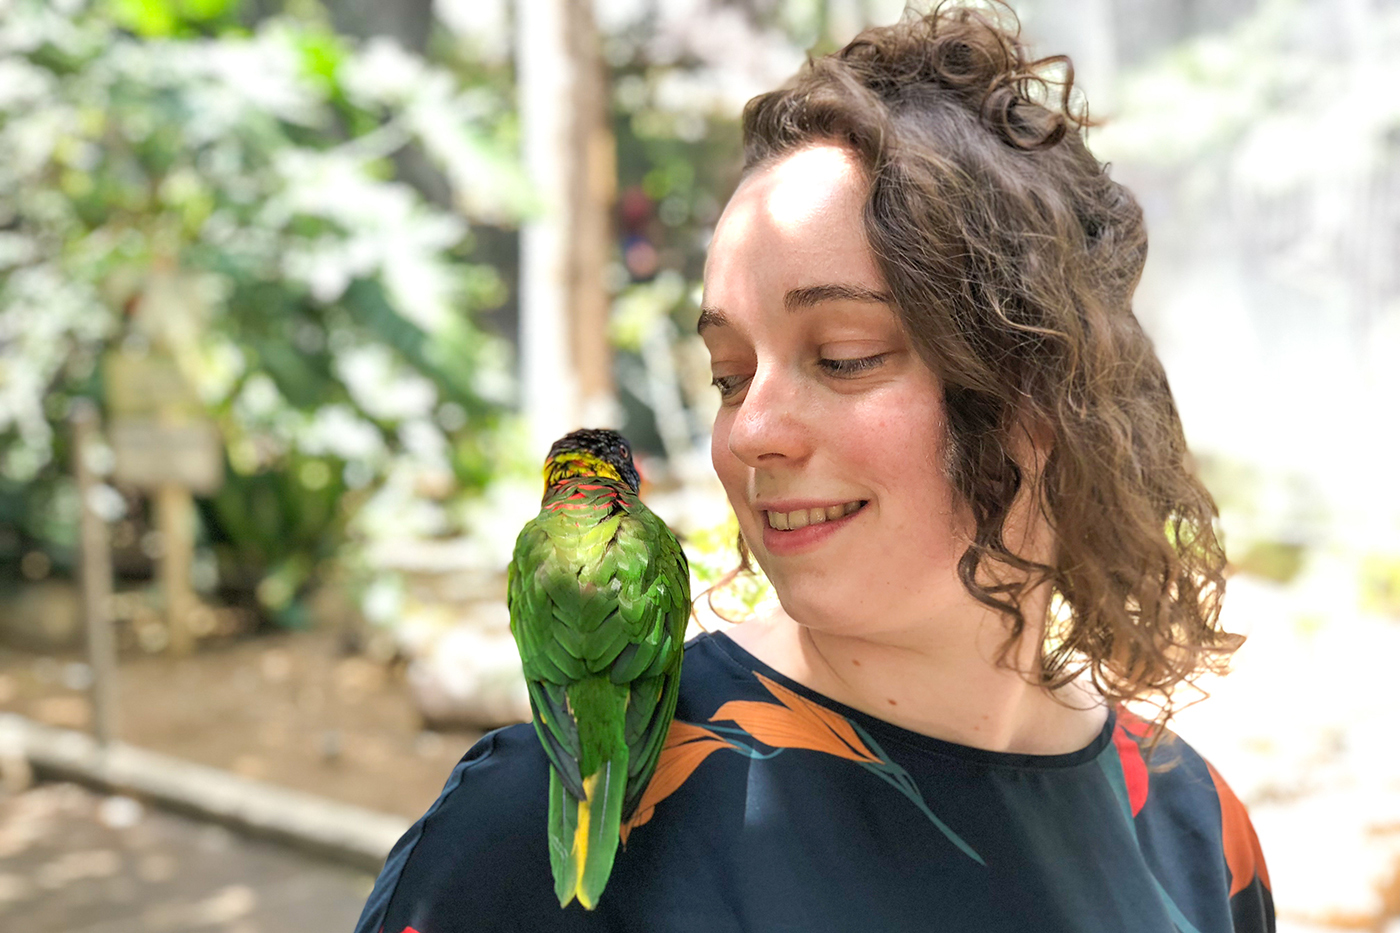 Rebecca Kleinberger with a parrot on her shoulder